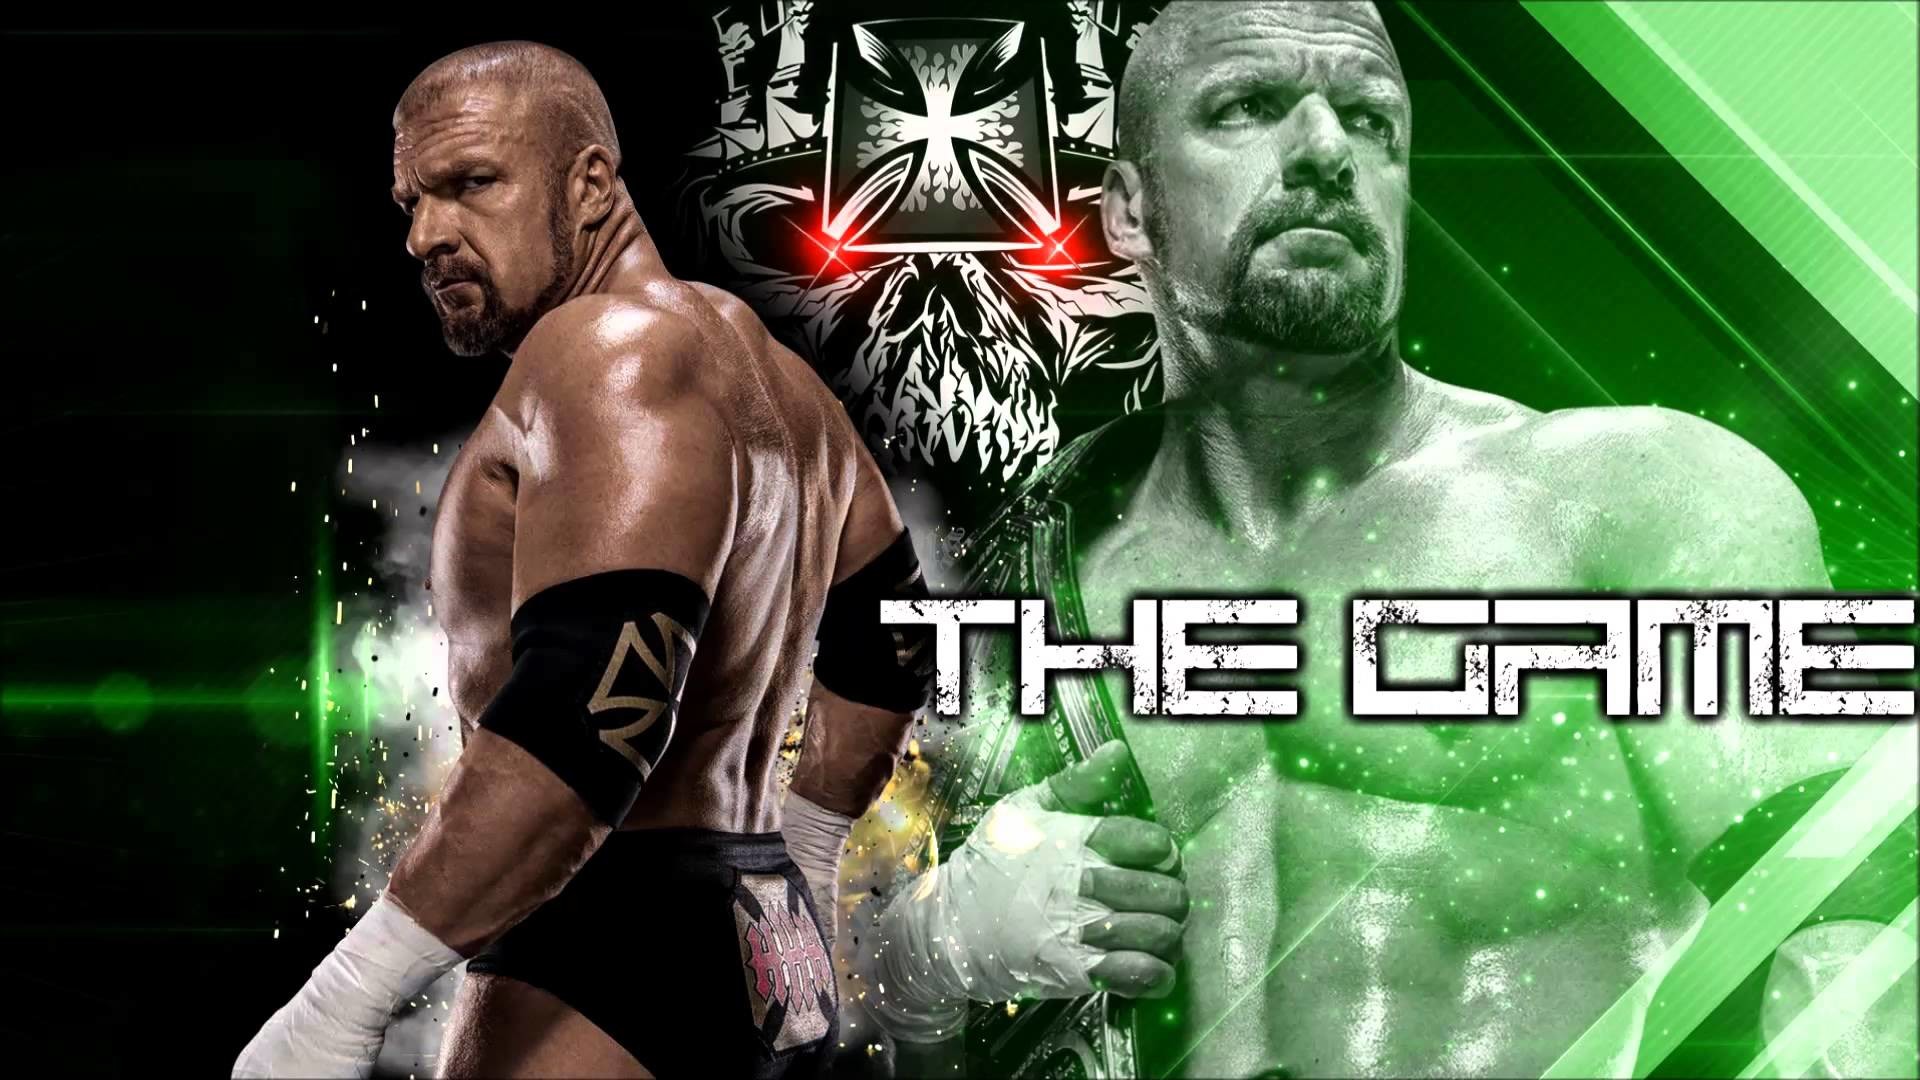 1920x1080 #LR Triple H Theme Song "The Game" by Drowning Pool